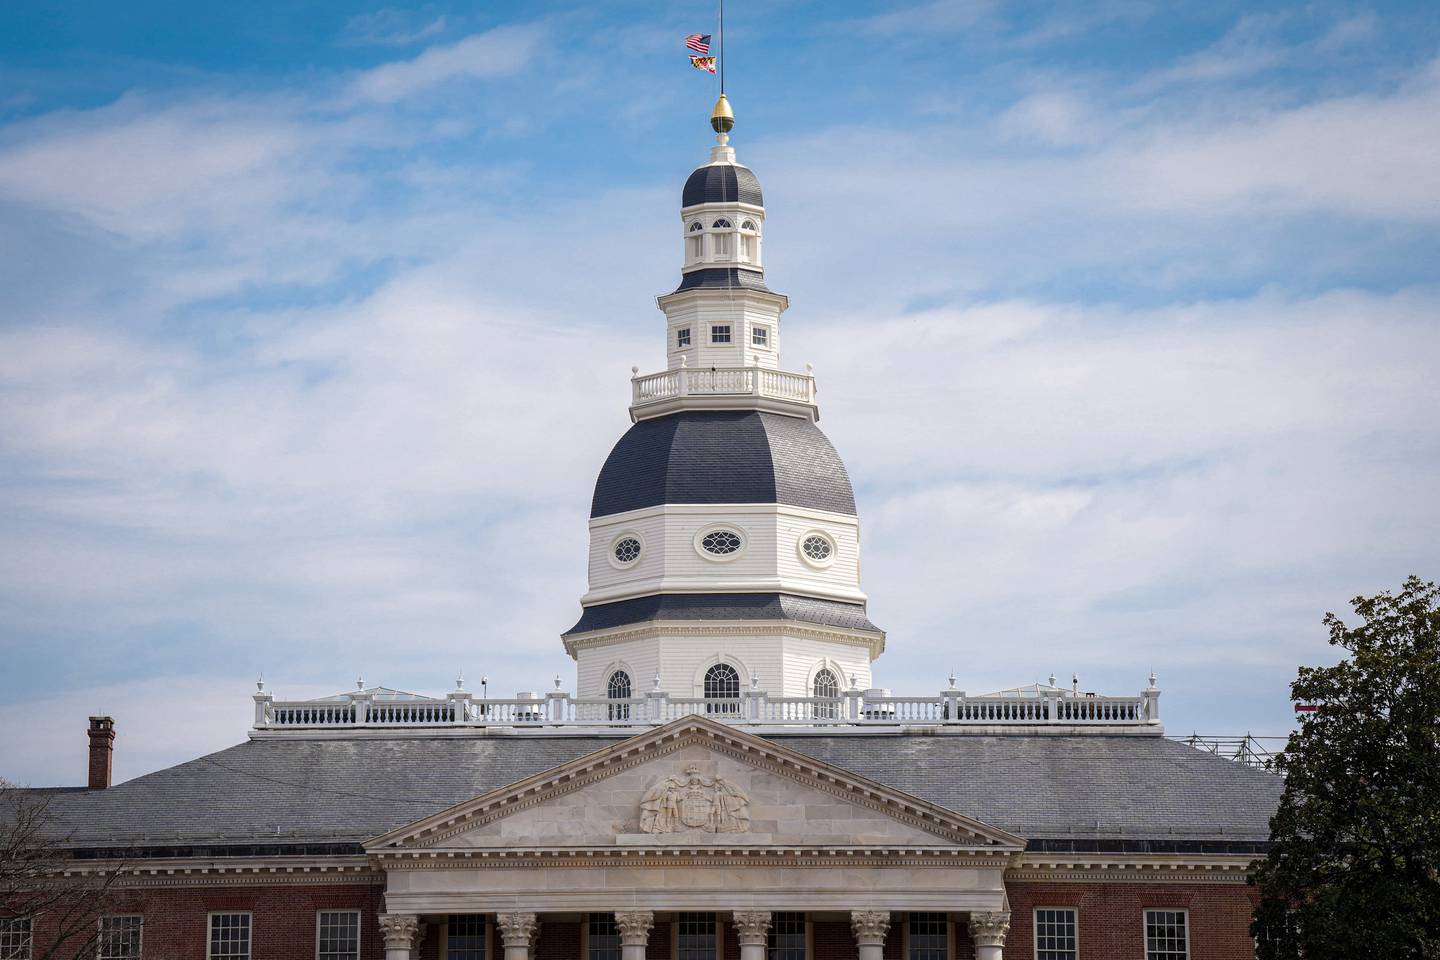 Exterior of the Maryland State House in Annapolis, as seen on Friday, March 31.